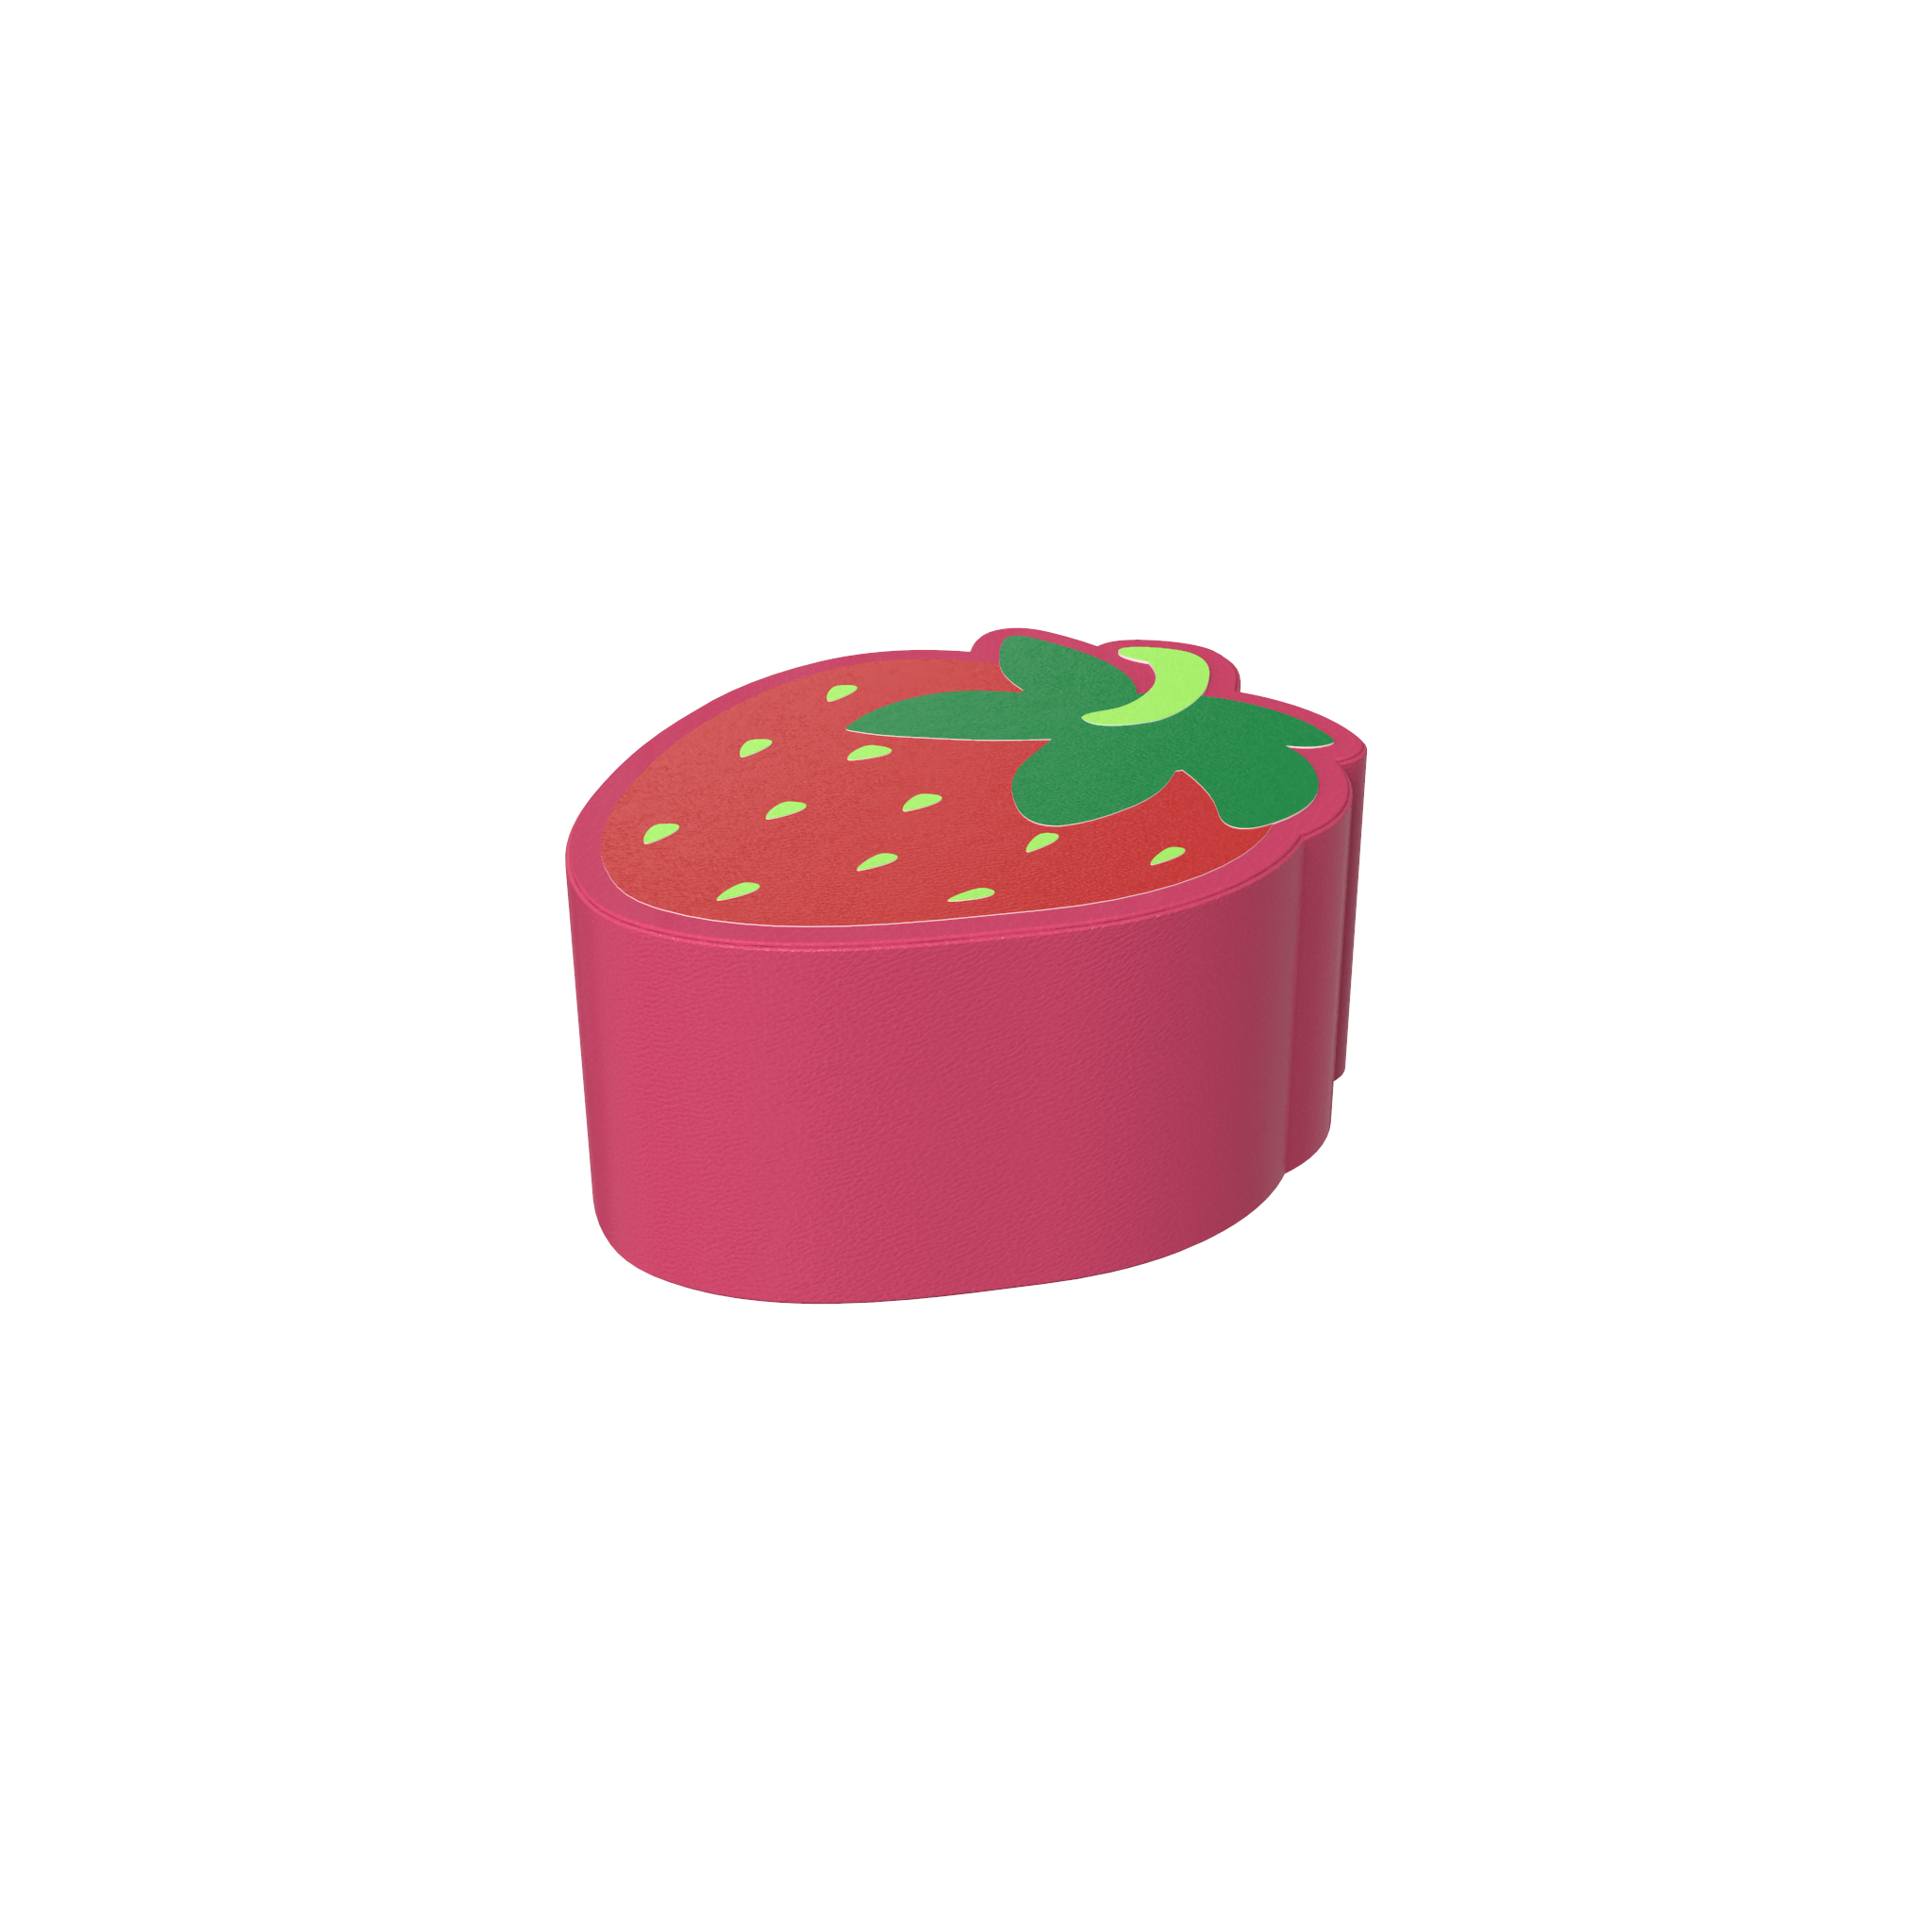 This image shows a soft play Strawberry